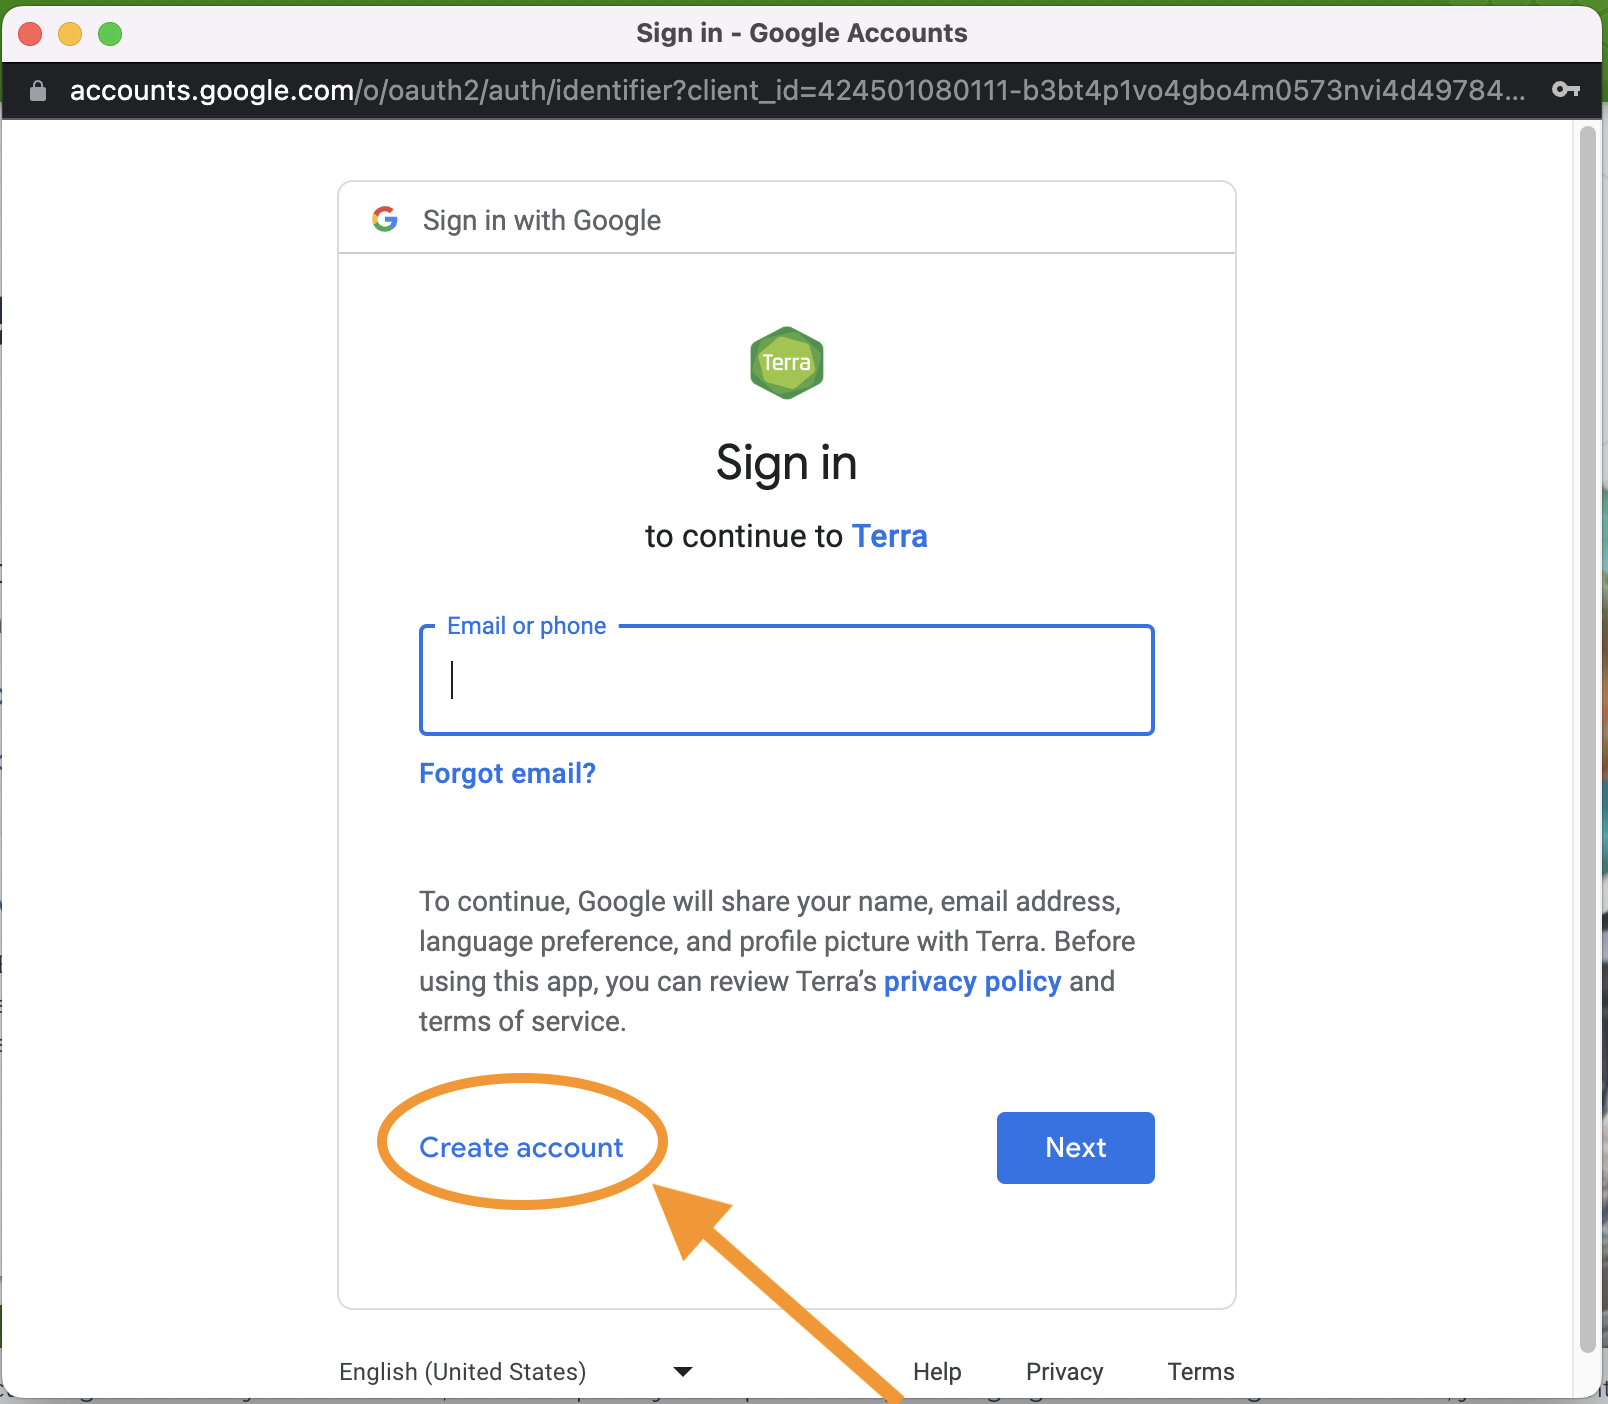 Screenshot of the sign in with Google popup with a blank field for email or phone number at the top and a blue next button at the bottom right. The create account link at bottom left is circled